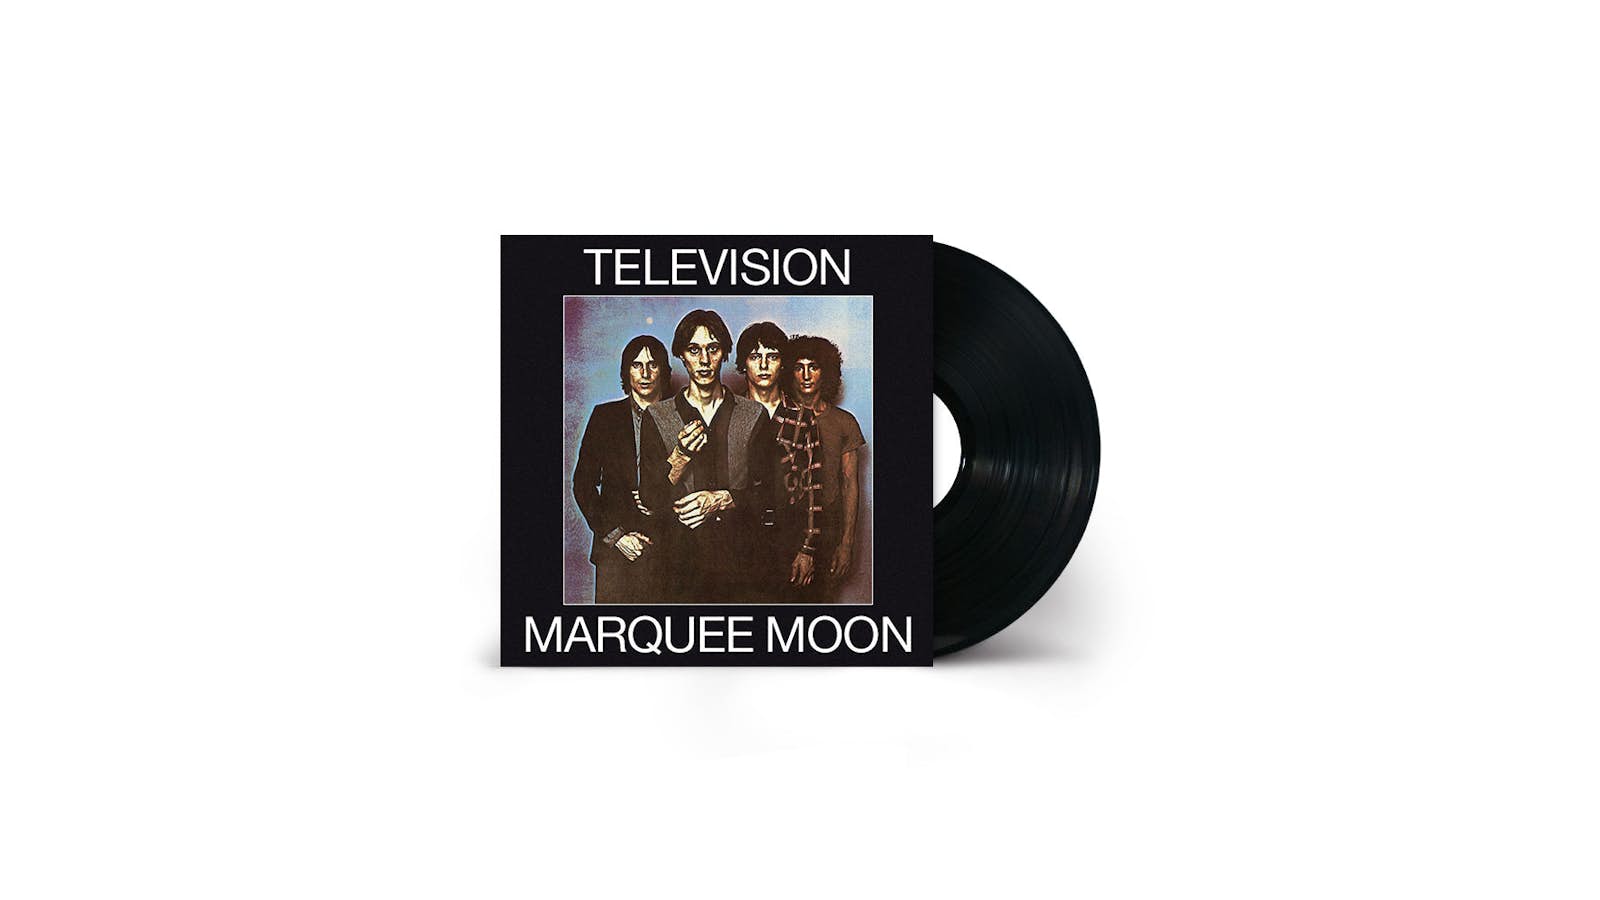 Television - Marquee Moon - Used Vinyl - High-Fidelity Vinyl Records and  Hi-Fi Equipment Hollywood Los Angeles CA